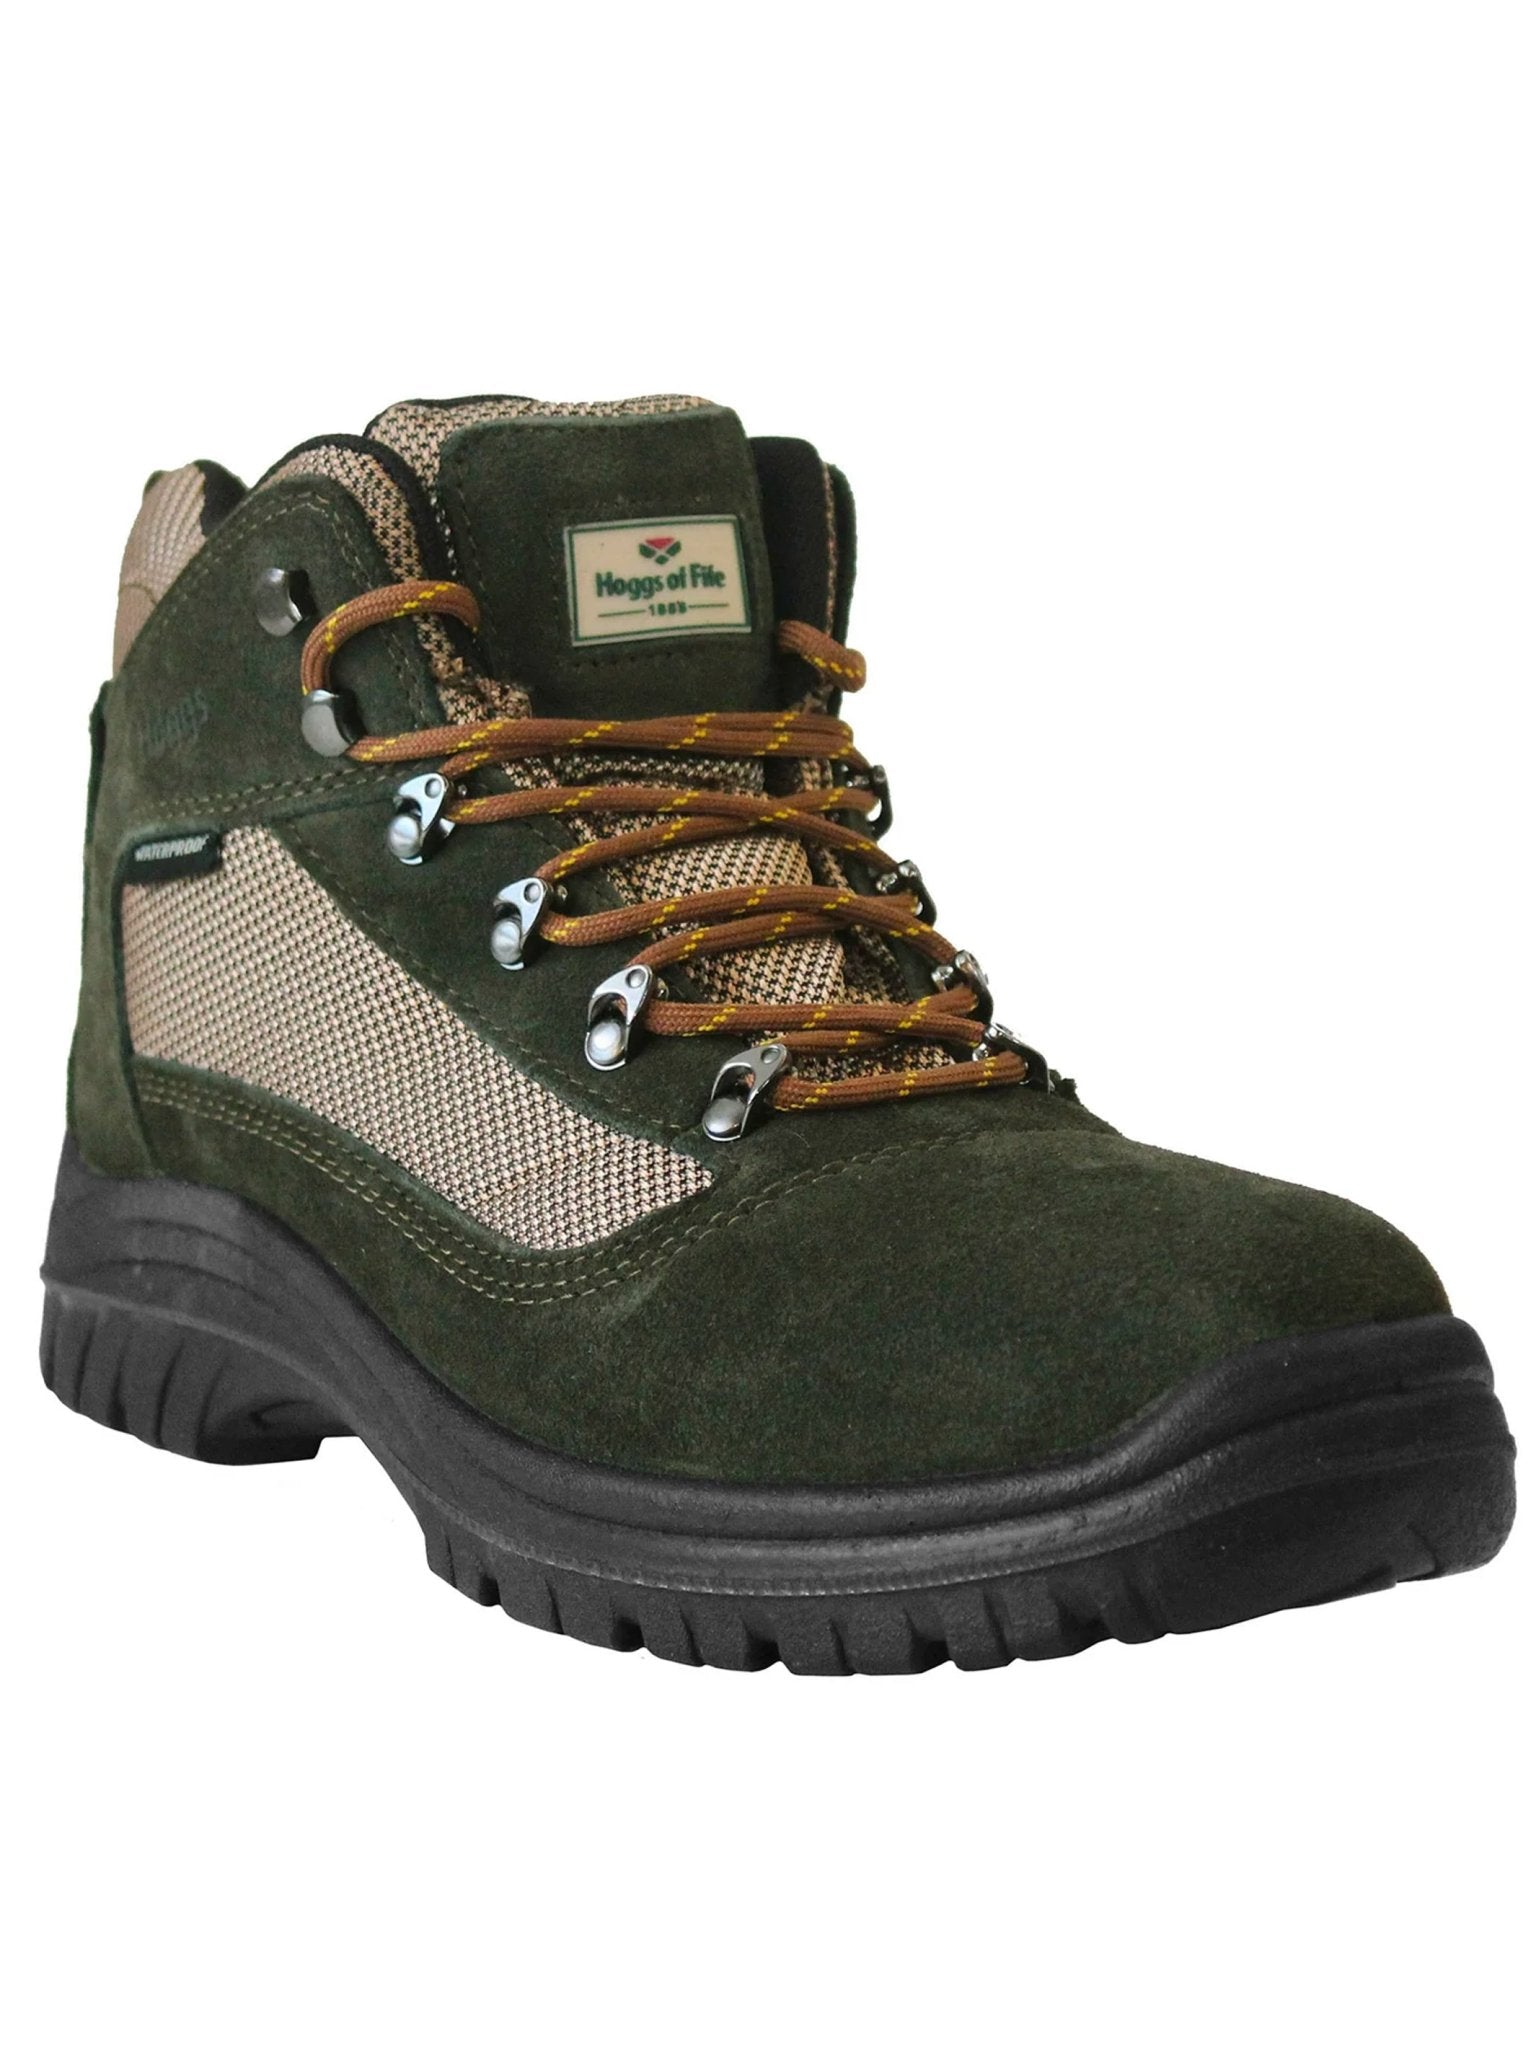 4elementsclothingHoggs of FifeHoggs of Fife - Rambler Waterproof boots, Hiking boot, Lightweight breathable bootsBootsRAMB/GR/040